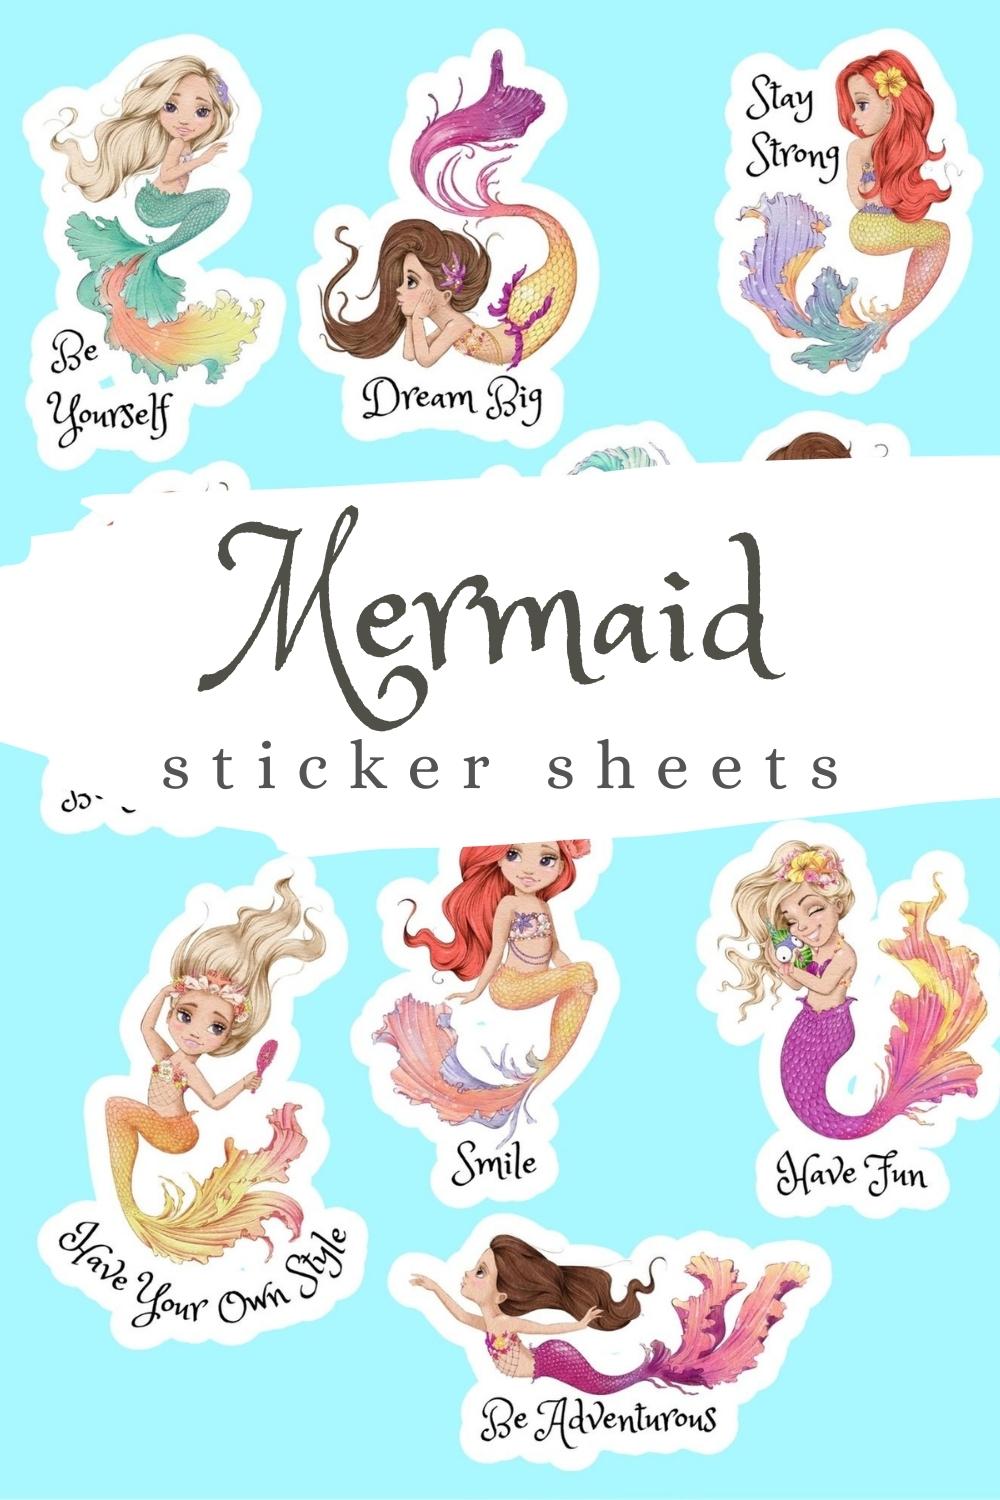 Captioned mermaid sticker sheets with themes including self-empowerment, summer vibes, pirates and more! Perfect for laptops, phone cases, and just about anywhere!